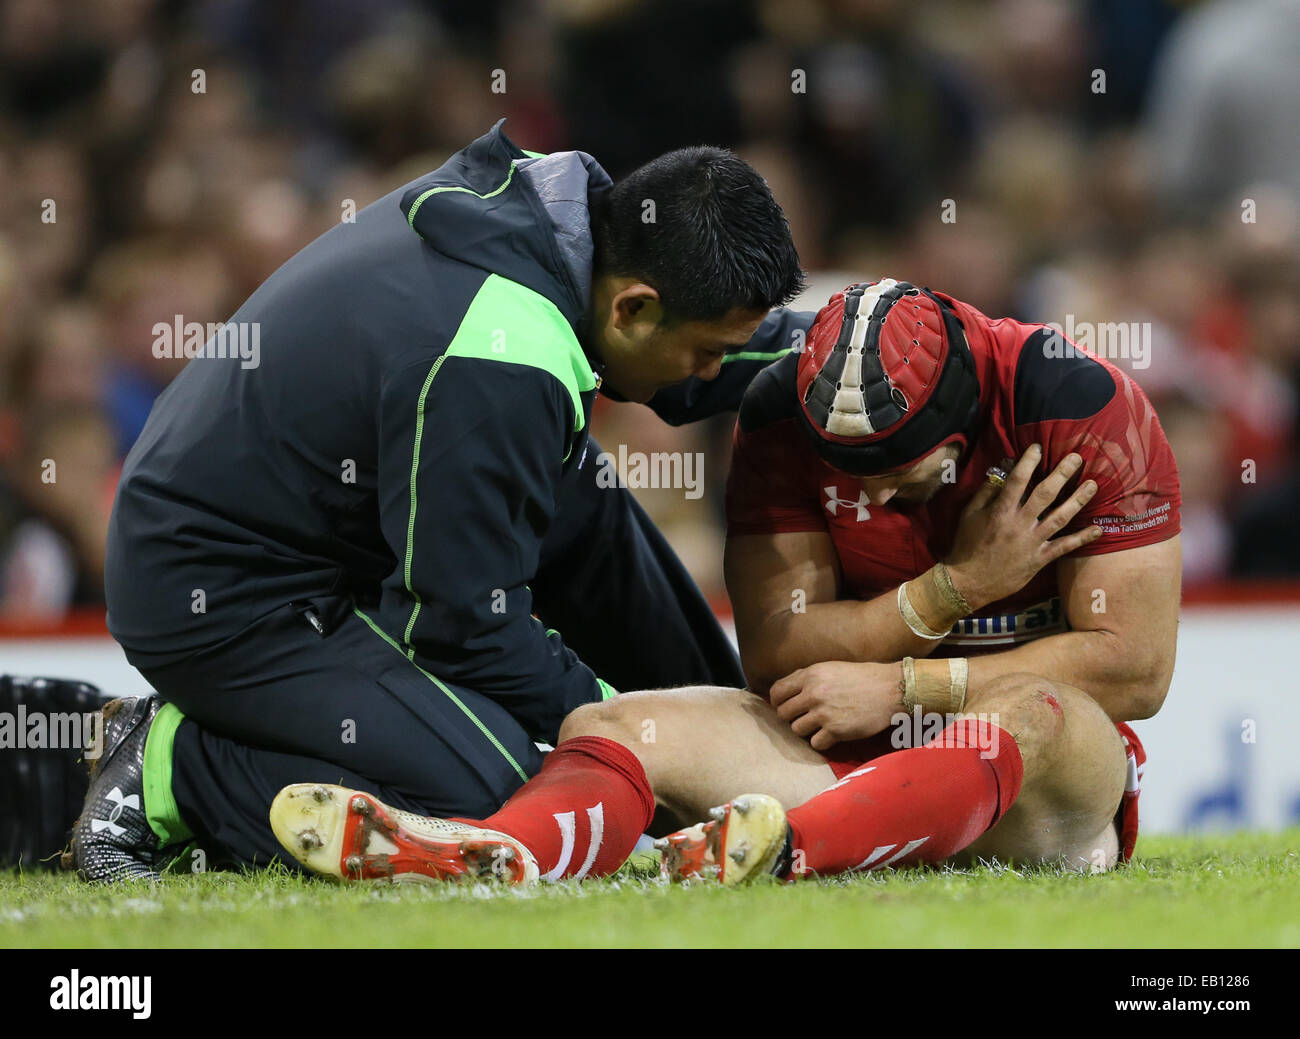 Cardiff, UK. 22nd Nov, 2014. Leigh Halfpenny of Wales injured - Autumn Test Series - Wales vs New Zealand - Millennium Stadium - Cardiff - Wales - 22nd November 2014 - Picture Simon Bellis/Sportimage. © csm/Alamy Live News Stock Photo